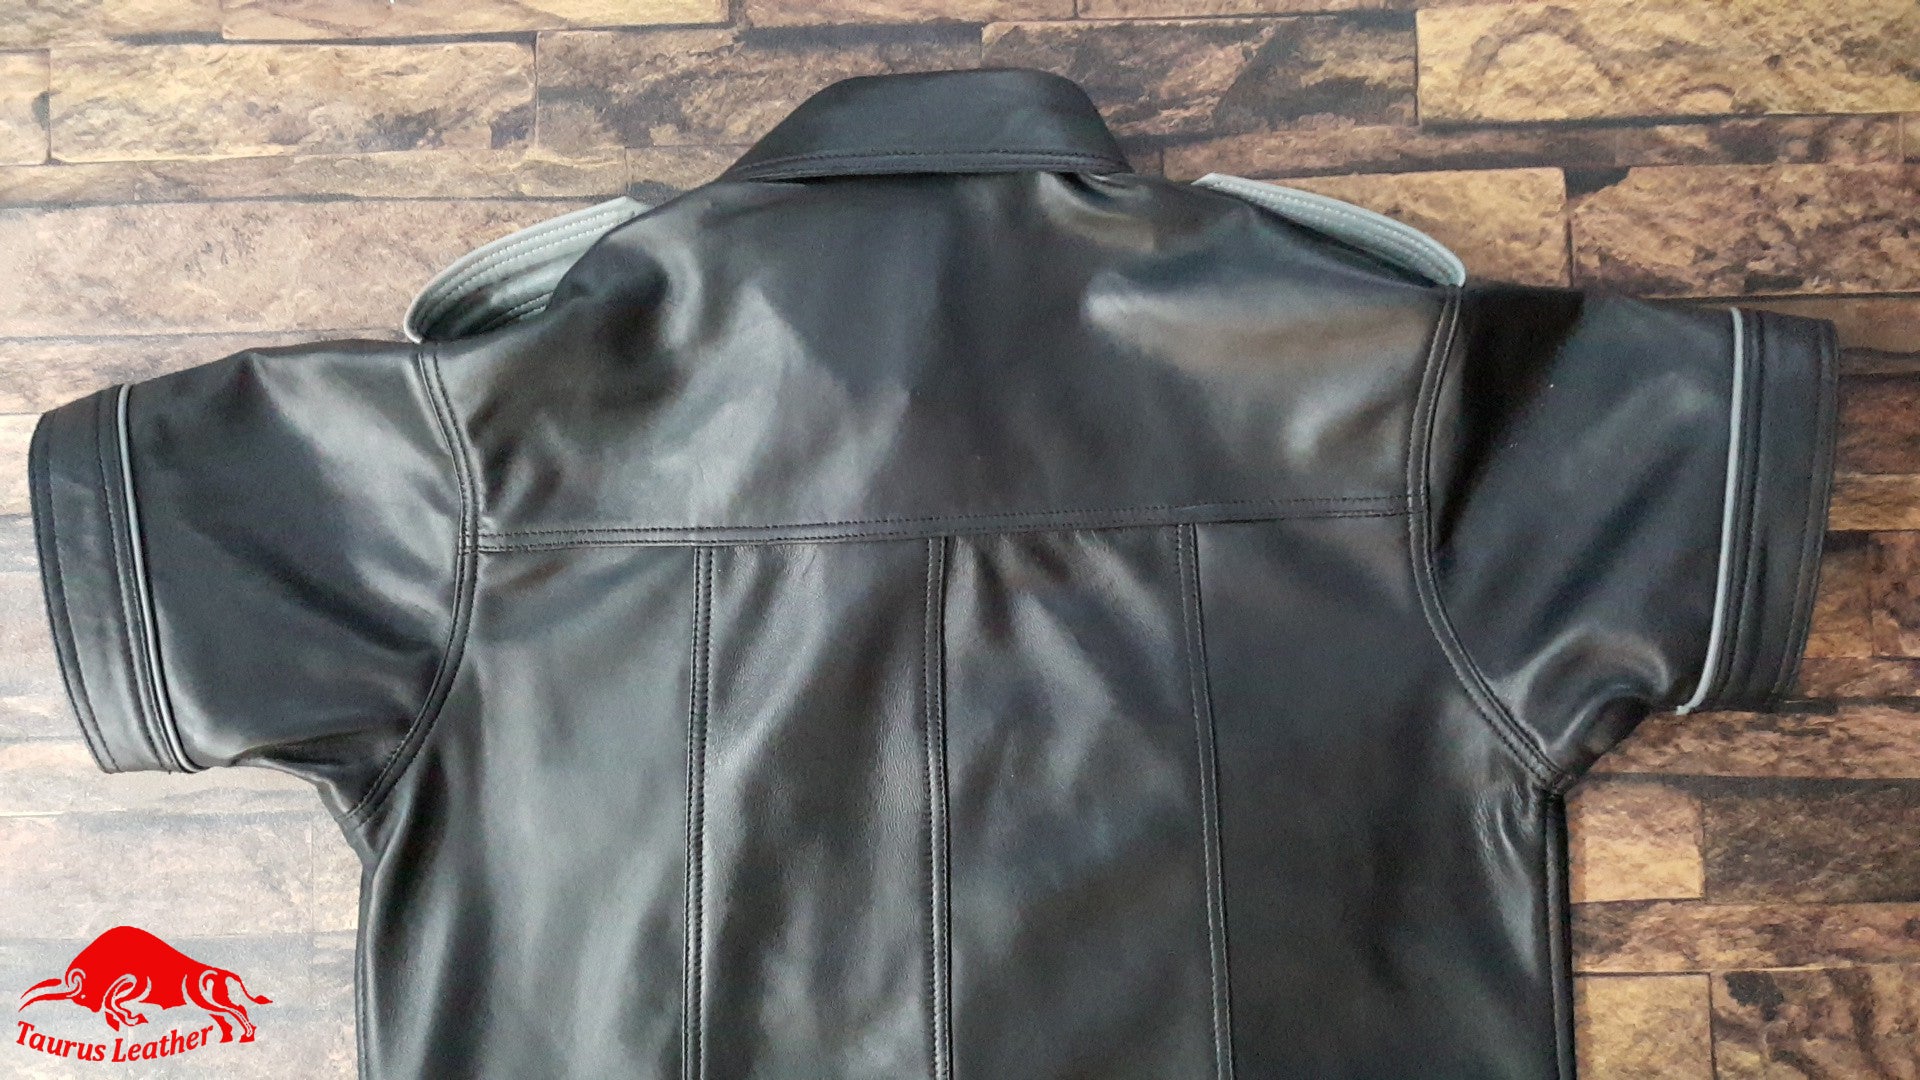 TAURUS LEATHER Black Shirt With Grey Trimming